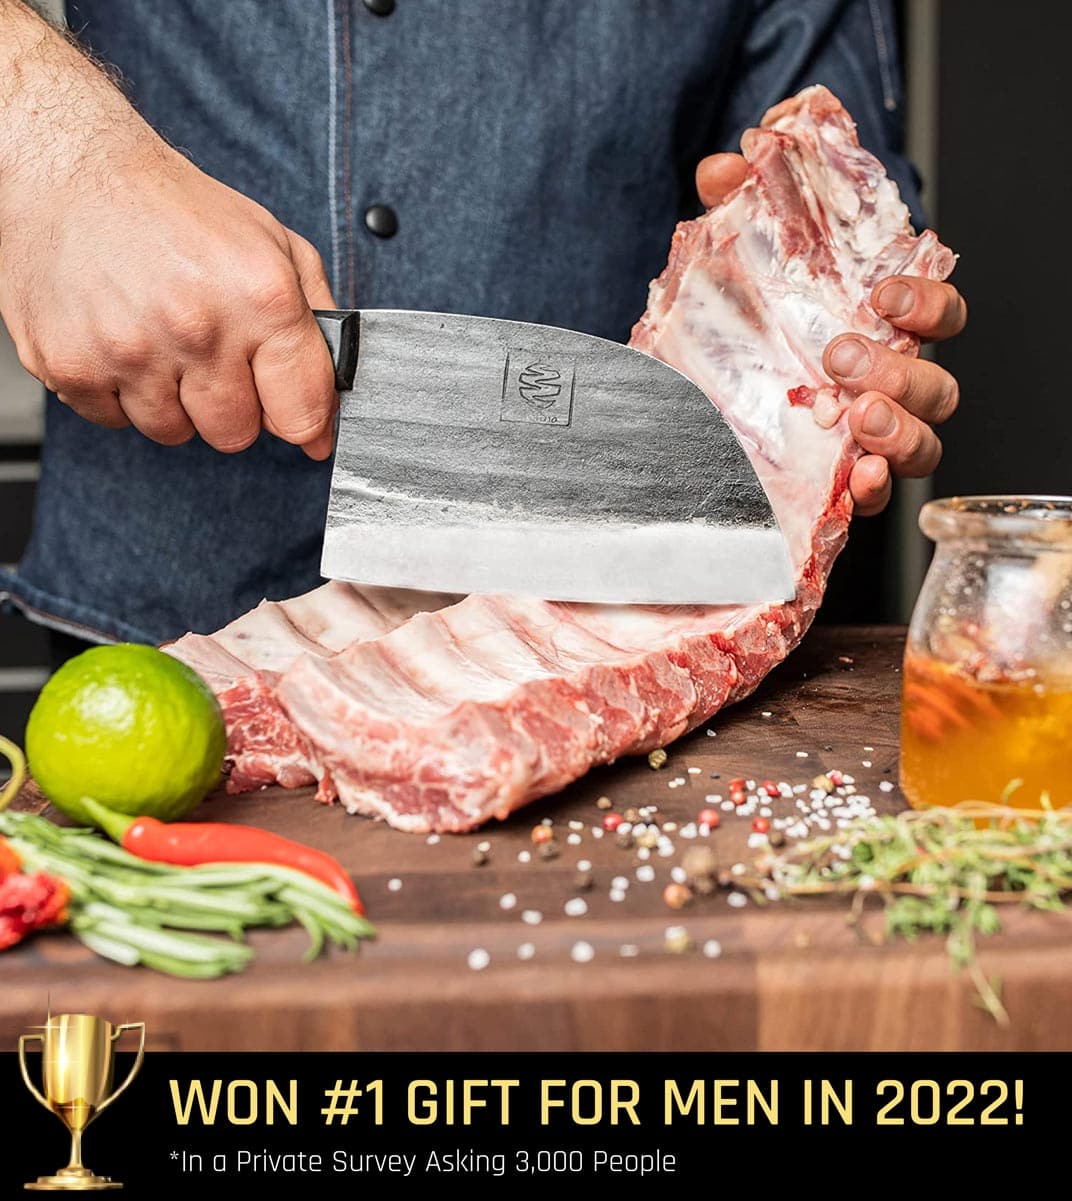 Professional handmade cooking chef knives. The best gifts for man – Coolina